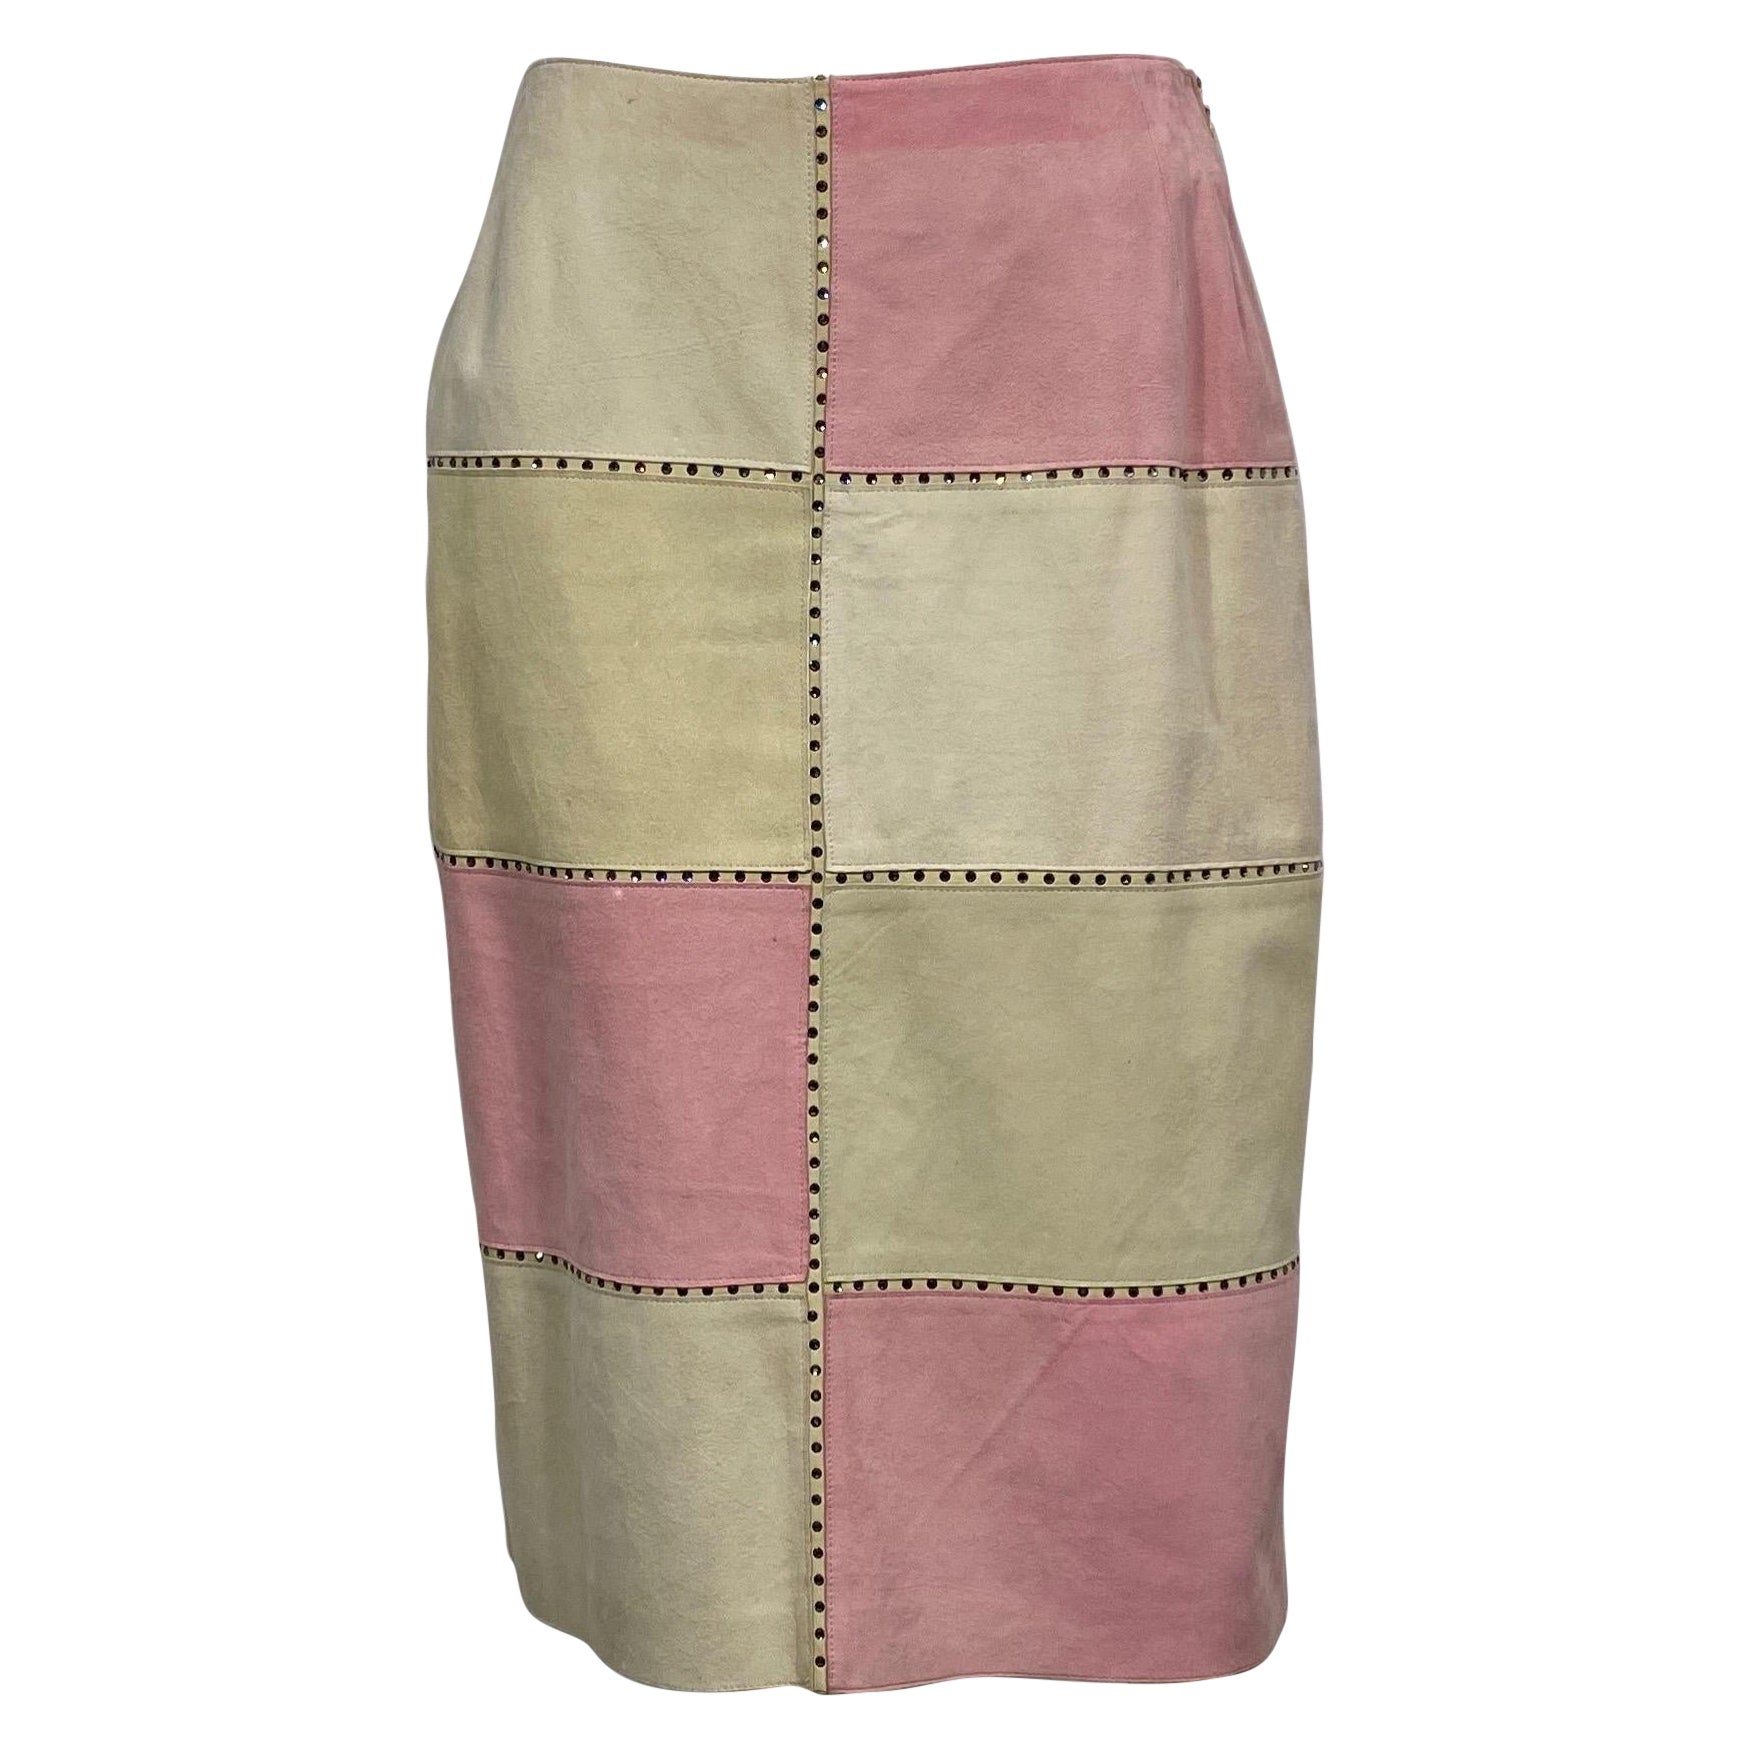 Valentino 2000 Autumn Collection Tan and Rose Patchwork Lambskin Skirt-Size 10 For Sale